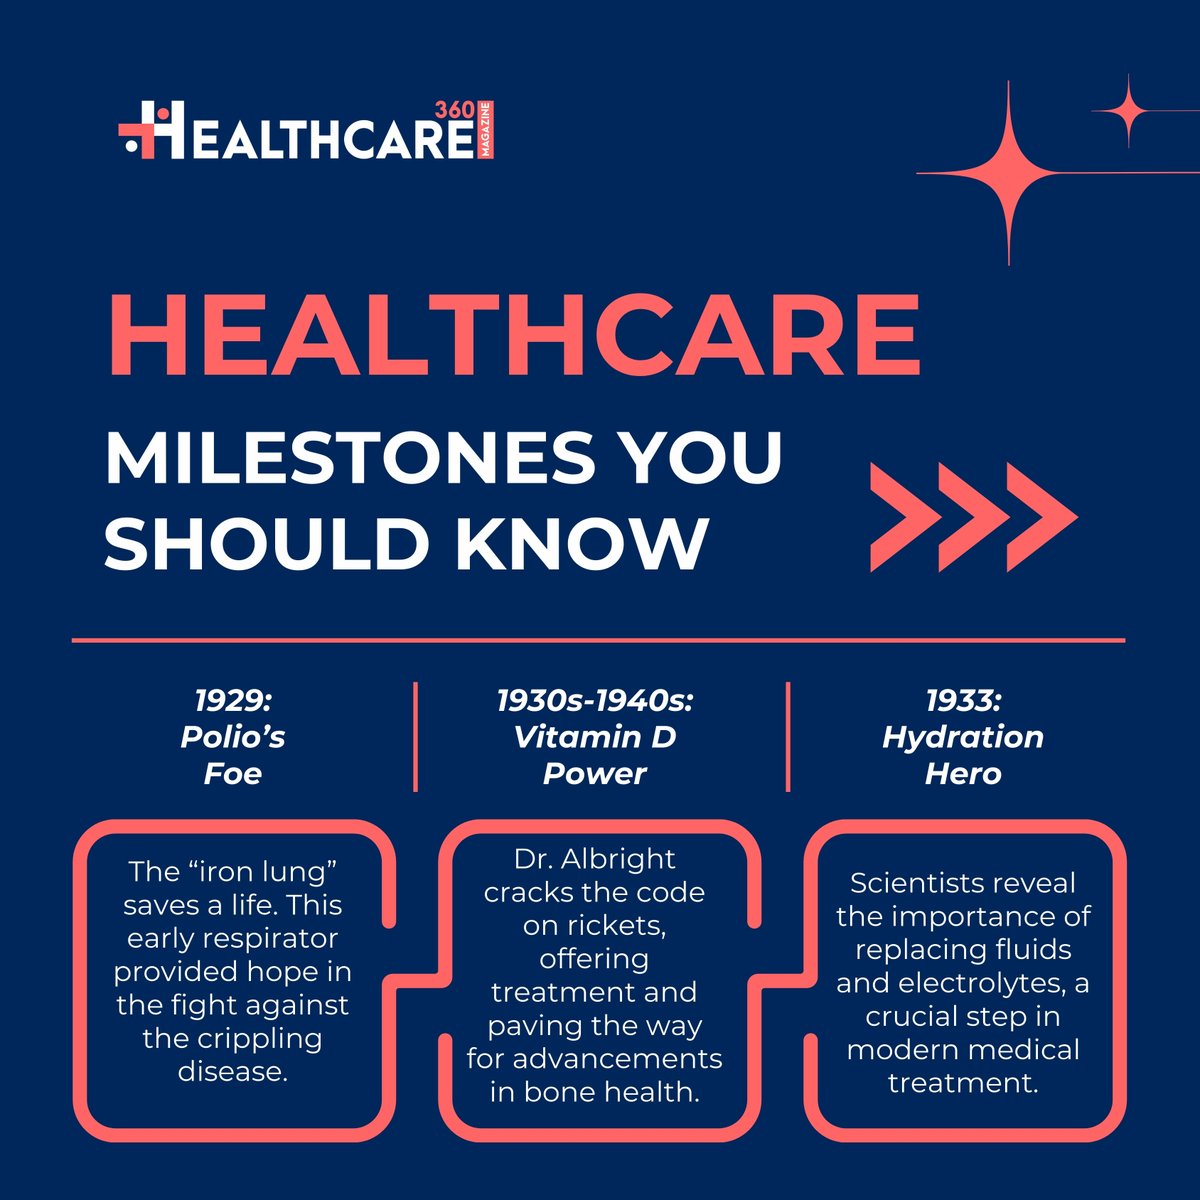 History in the making: These breakthroughs paved the way for modern medicine.

#HealthcareHistory #MedicalMilestones #ScienceSavesLives